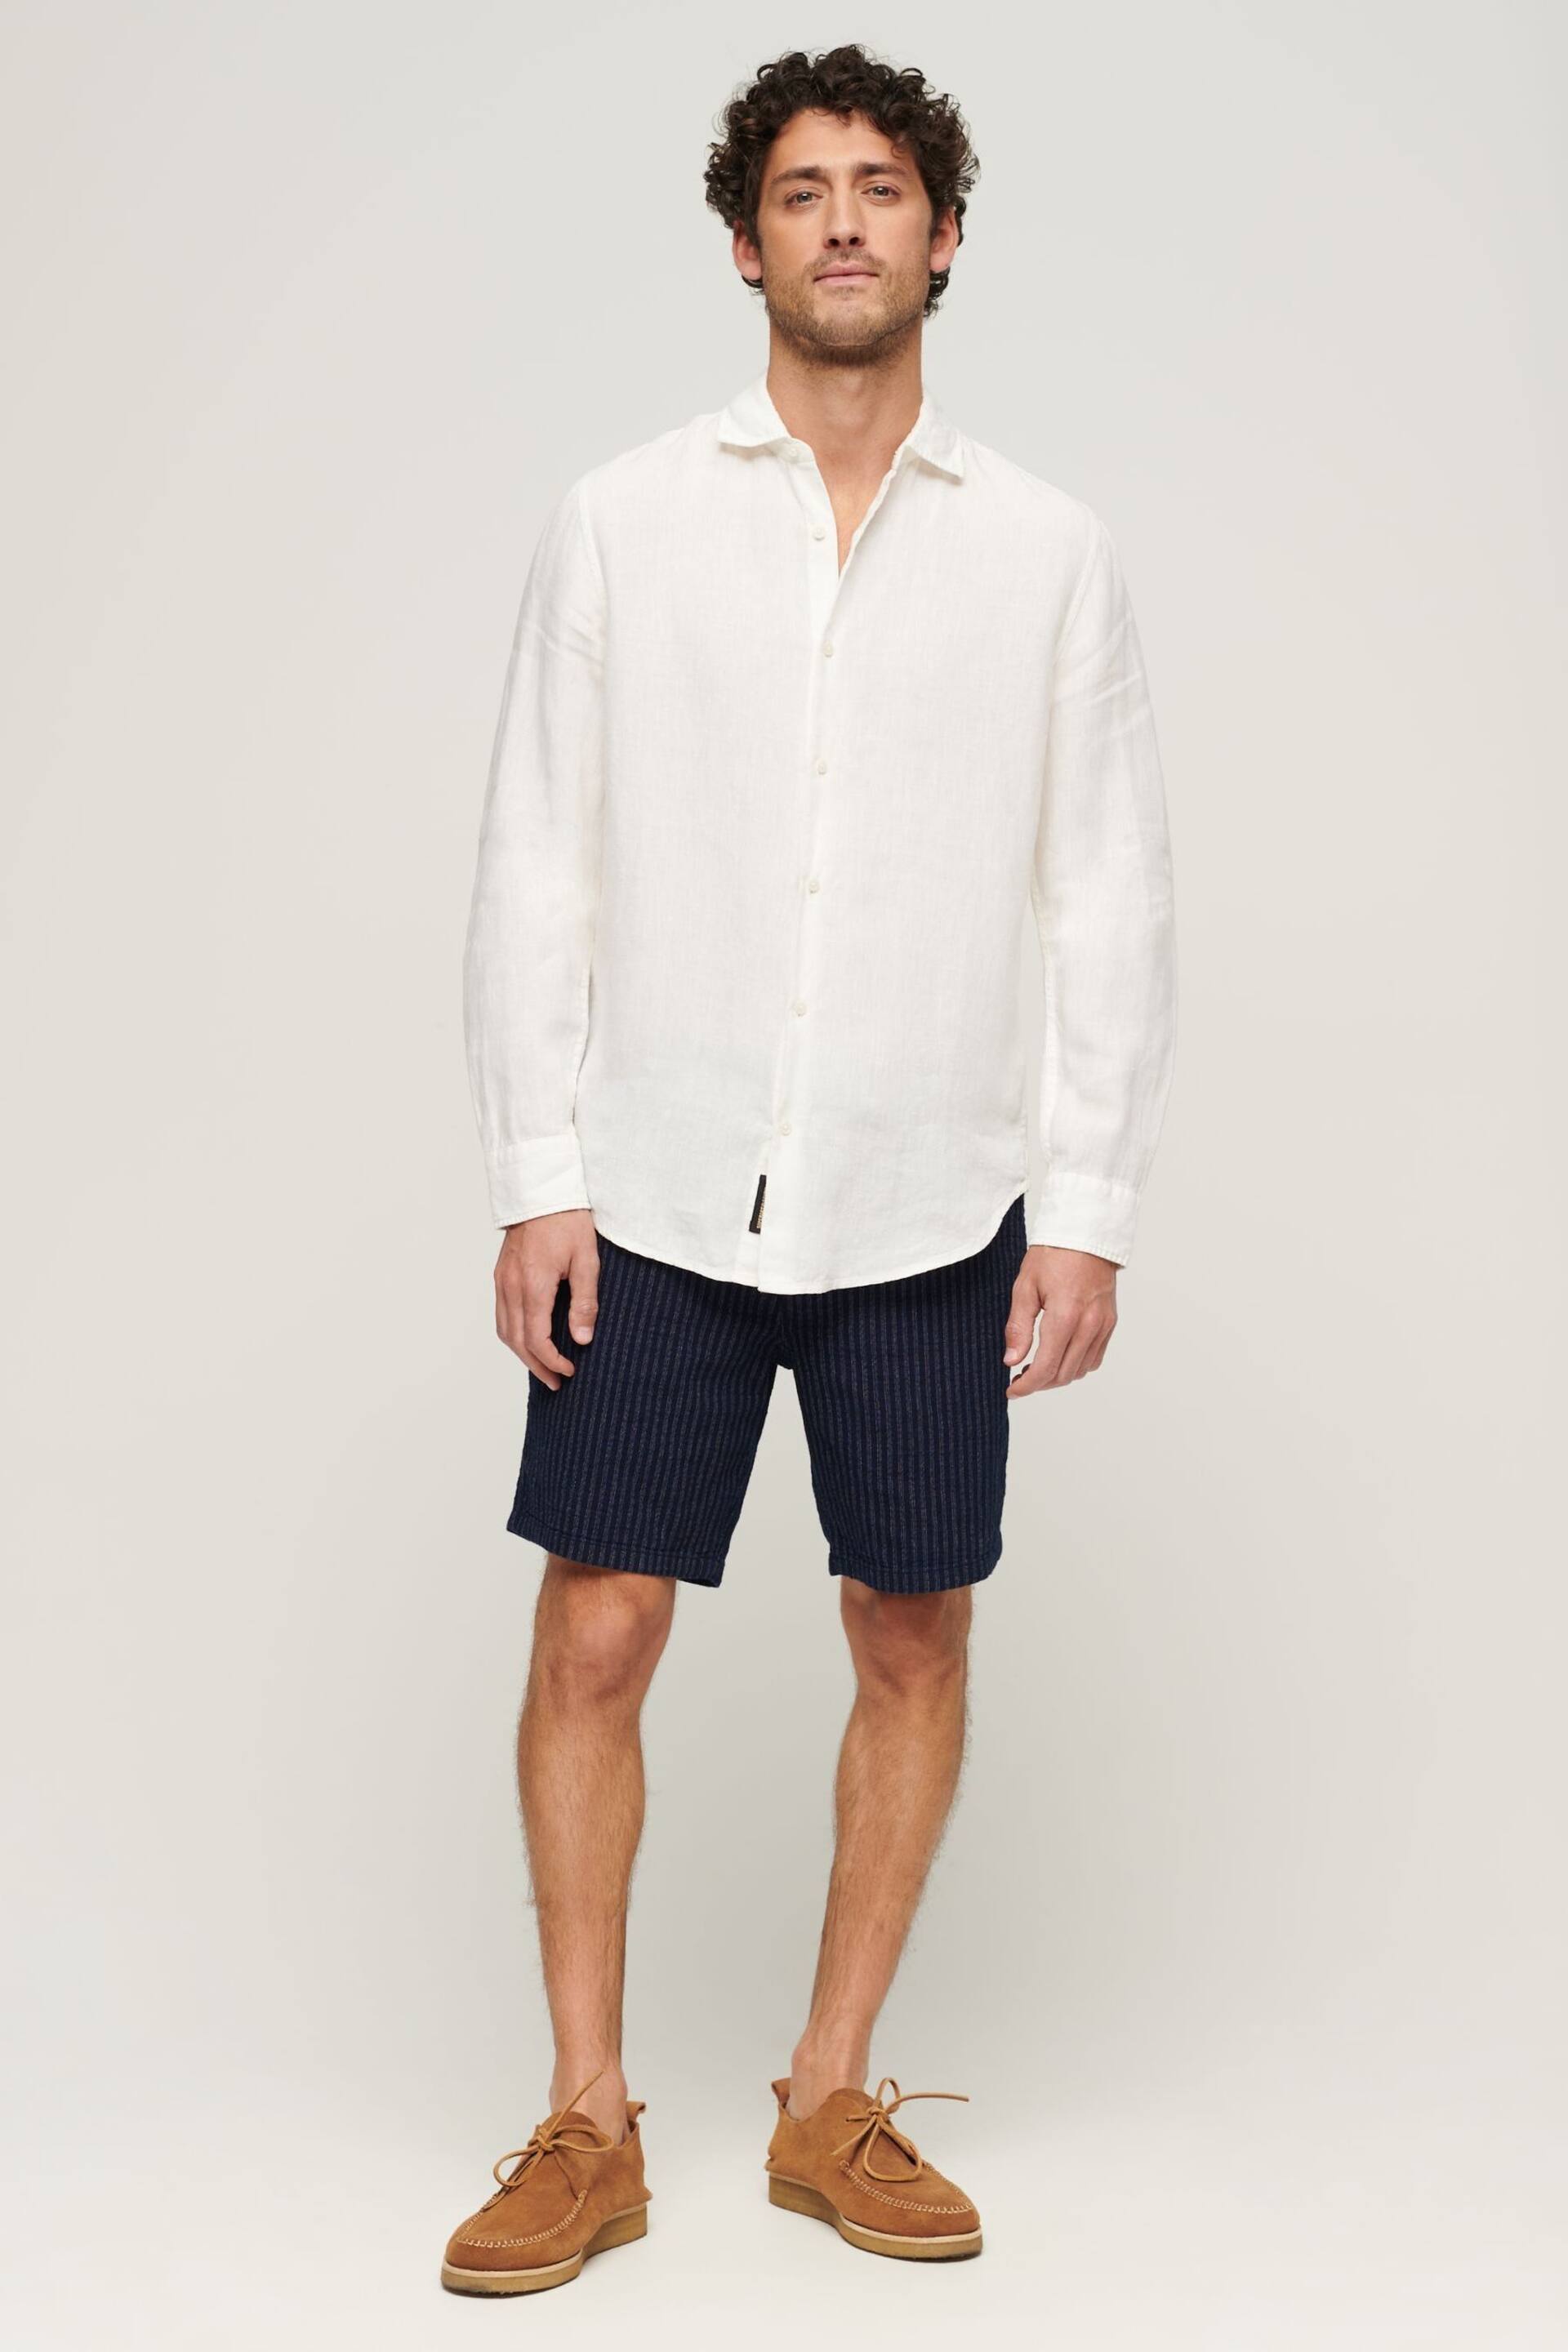 Superdry Optic Studios Casual Linen Long Sleeved Shirt - Image 3 of 7